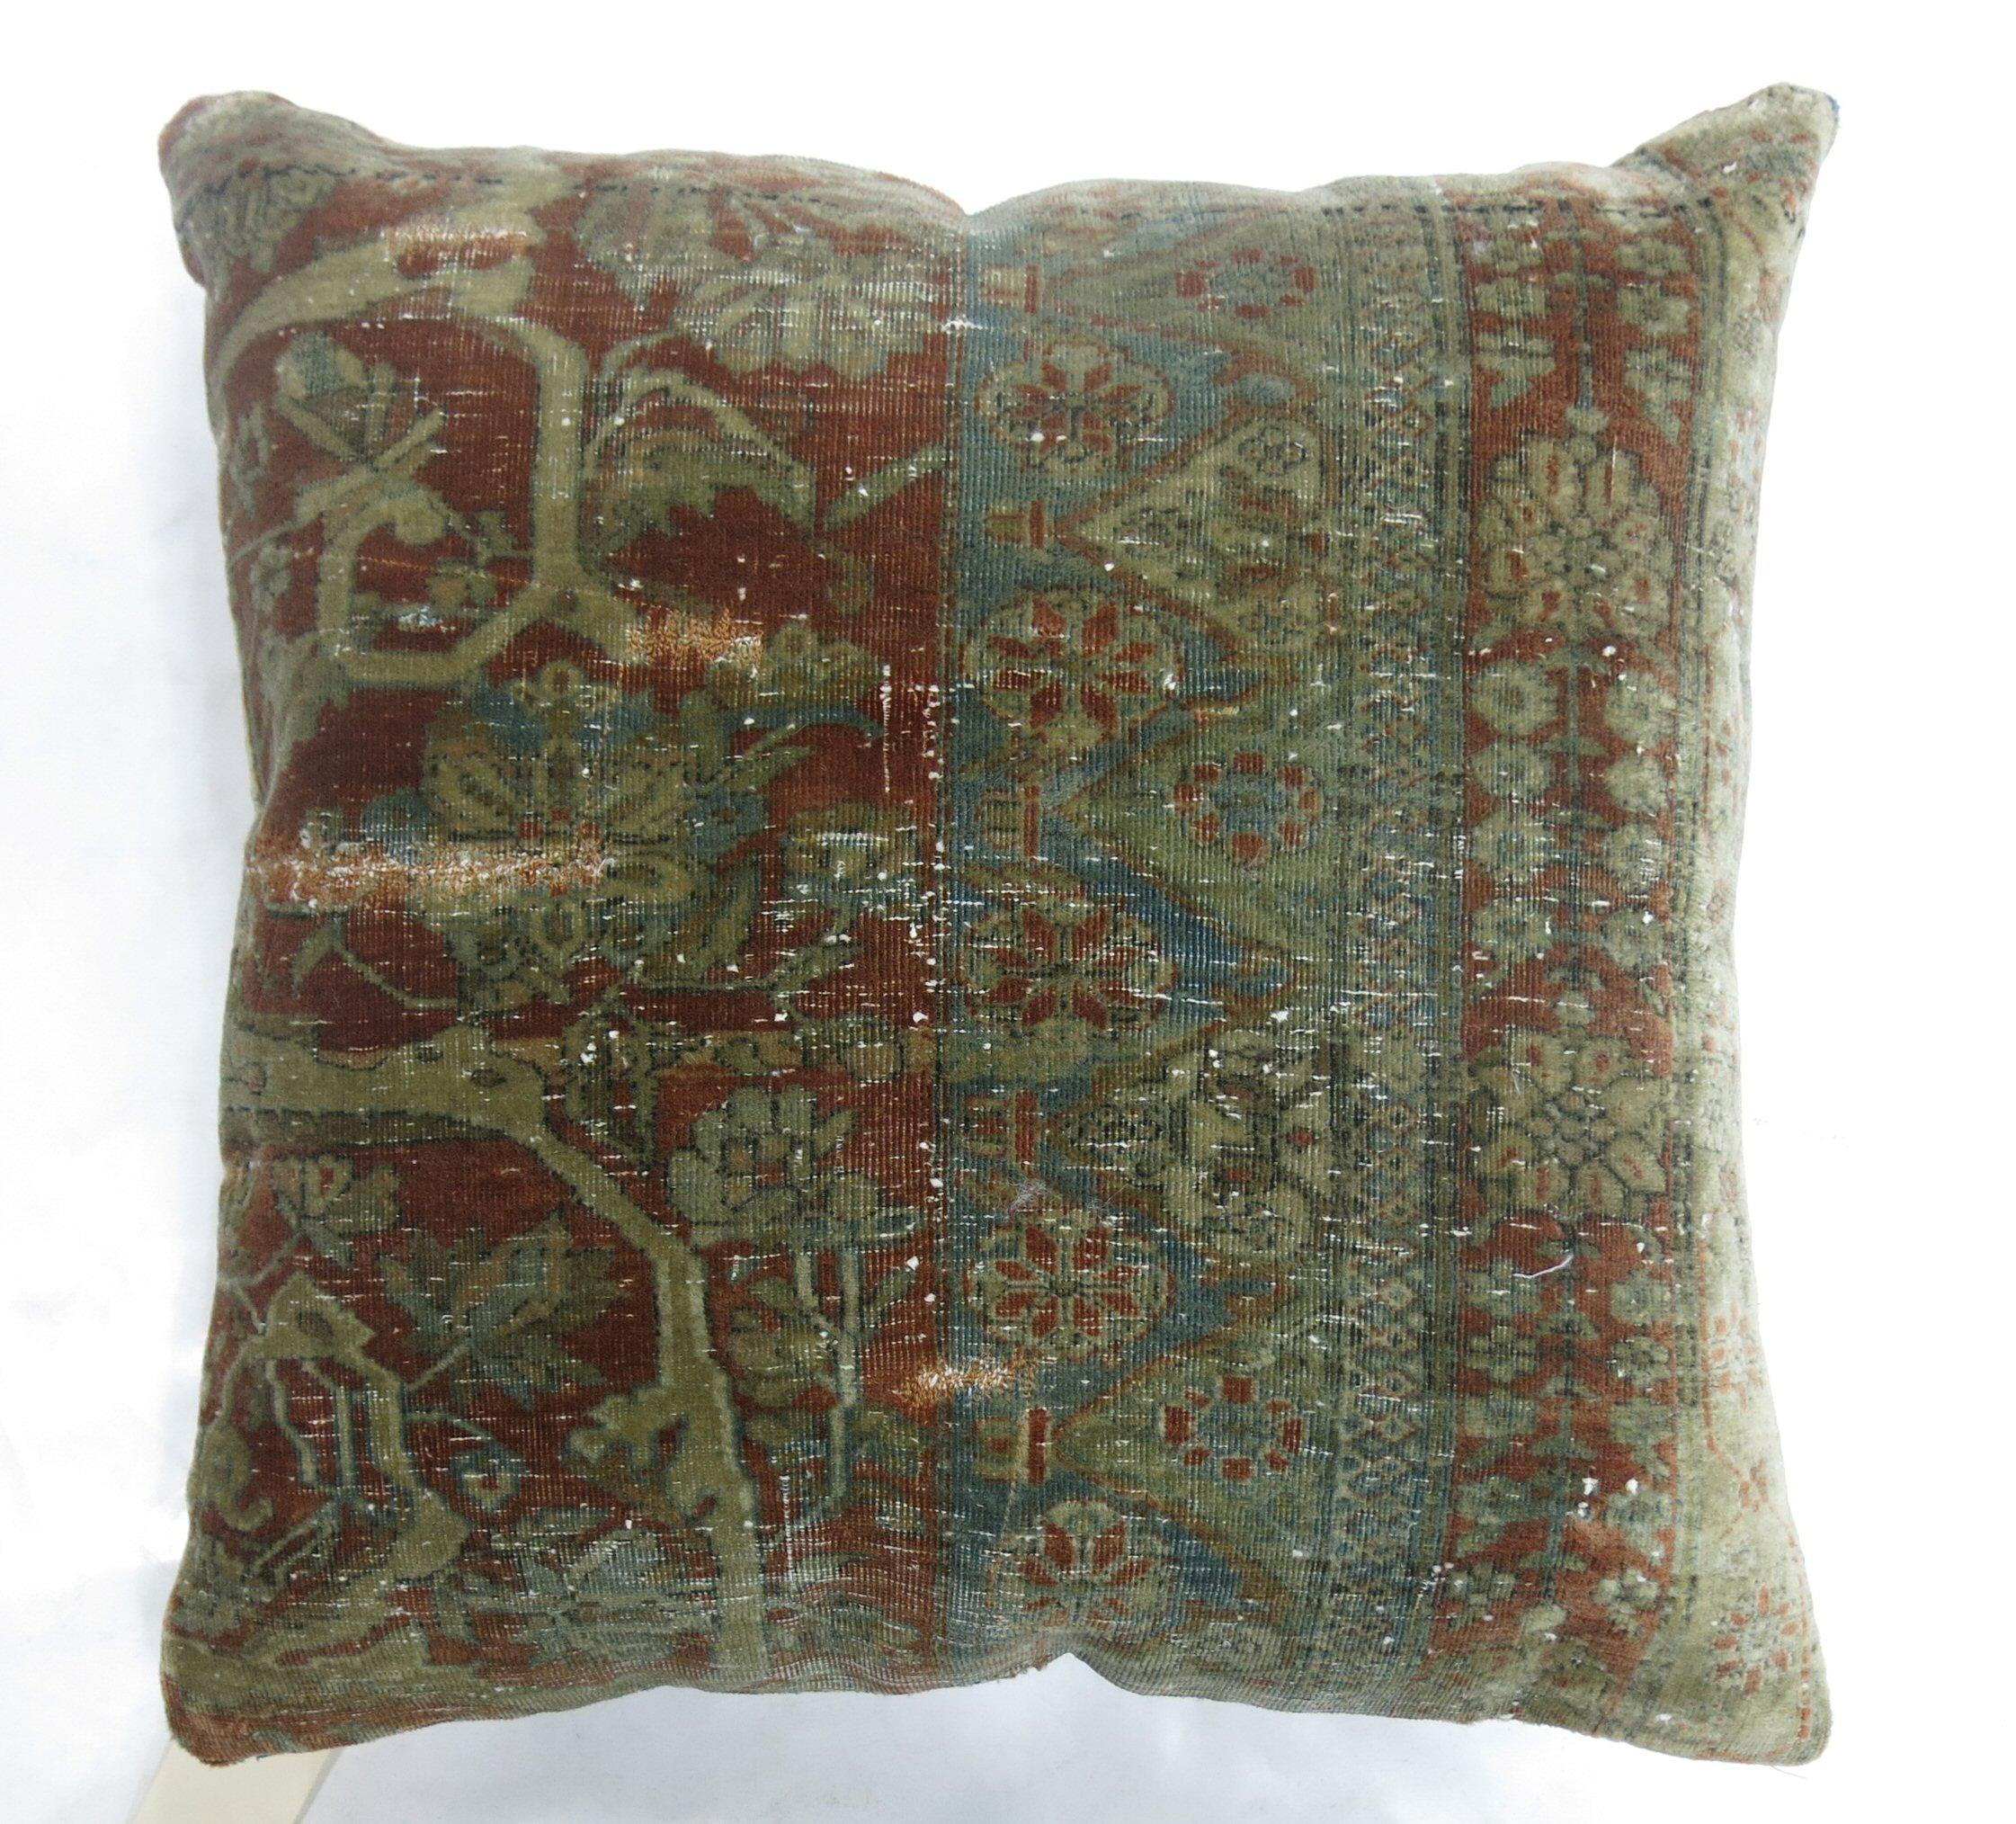 Pillow made from a 19th century Mohtasham Kashan rug zipper closure and poly fill insert provided

20'' x 20''